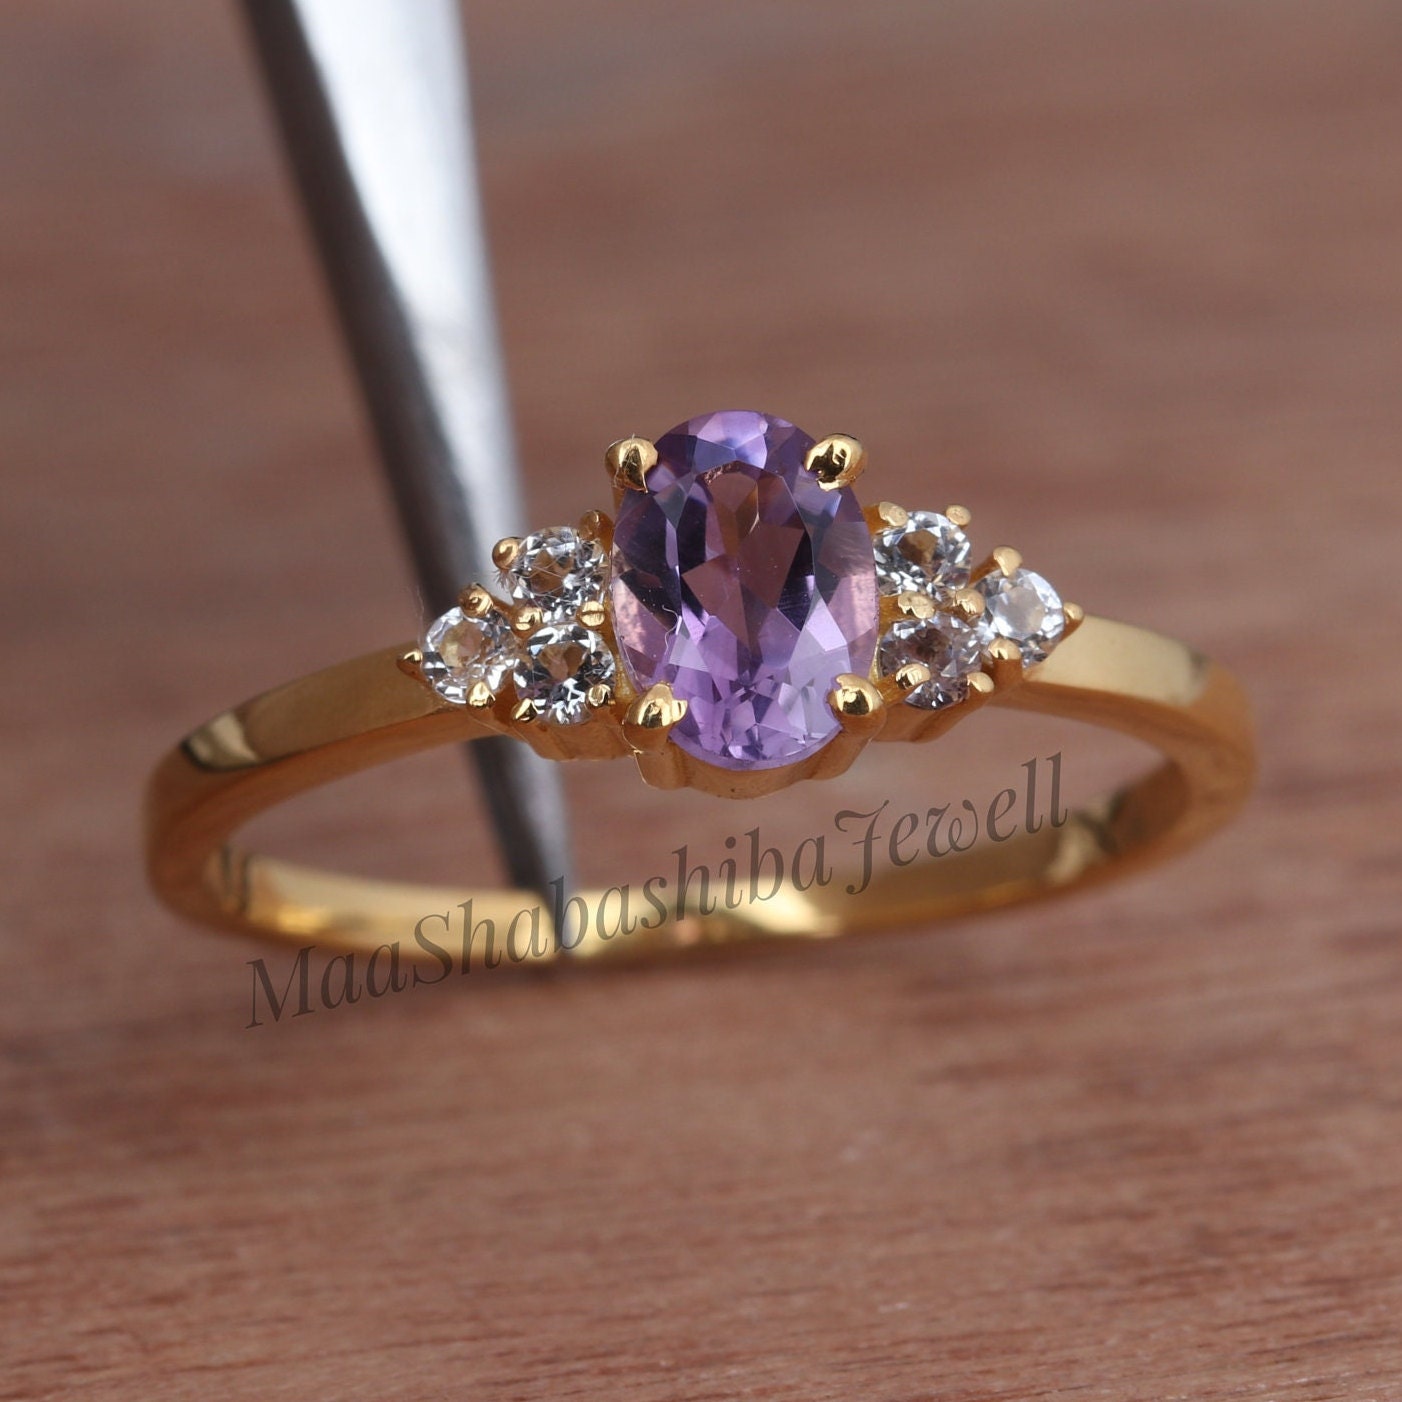 Adjustable 92.5 Sterling Silver Rings Oxidized With Amethyst Stone  Traditional Motifs